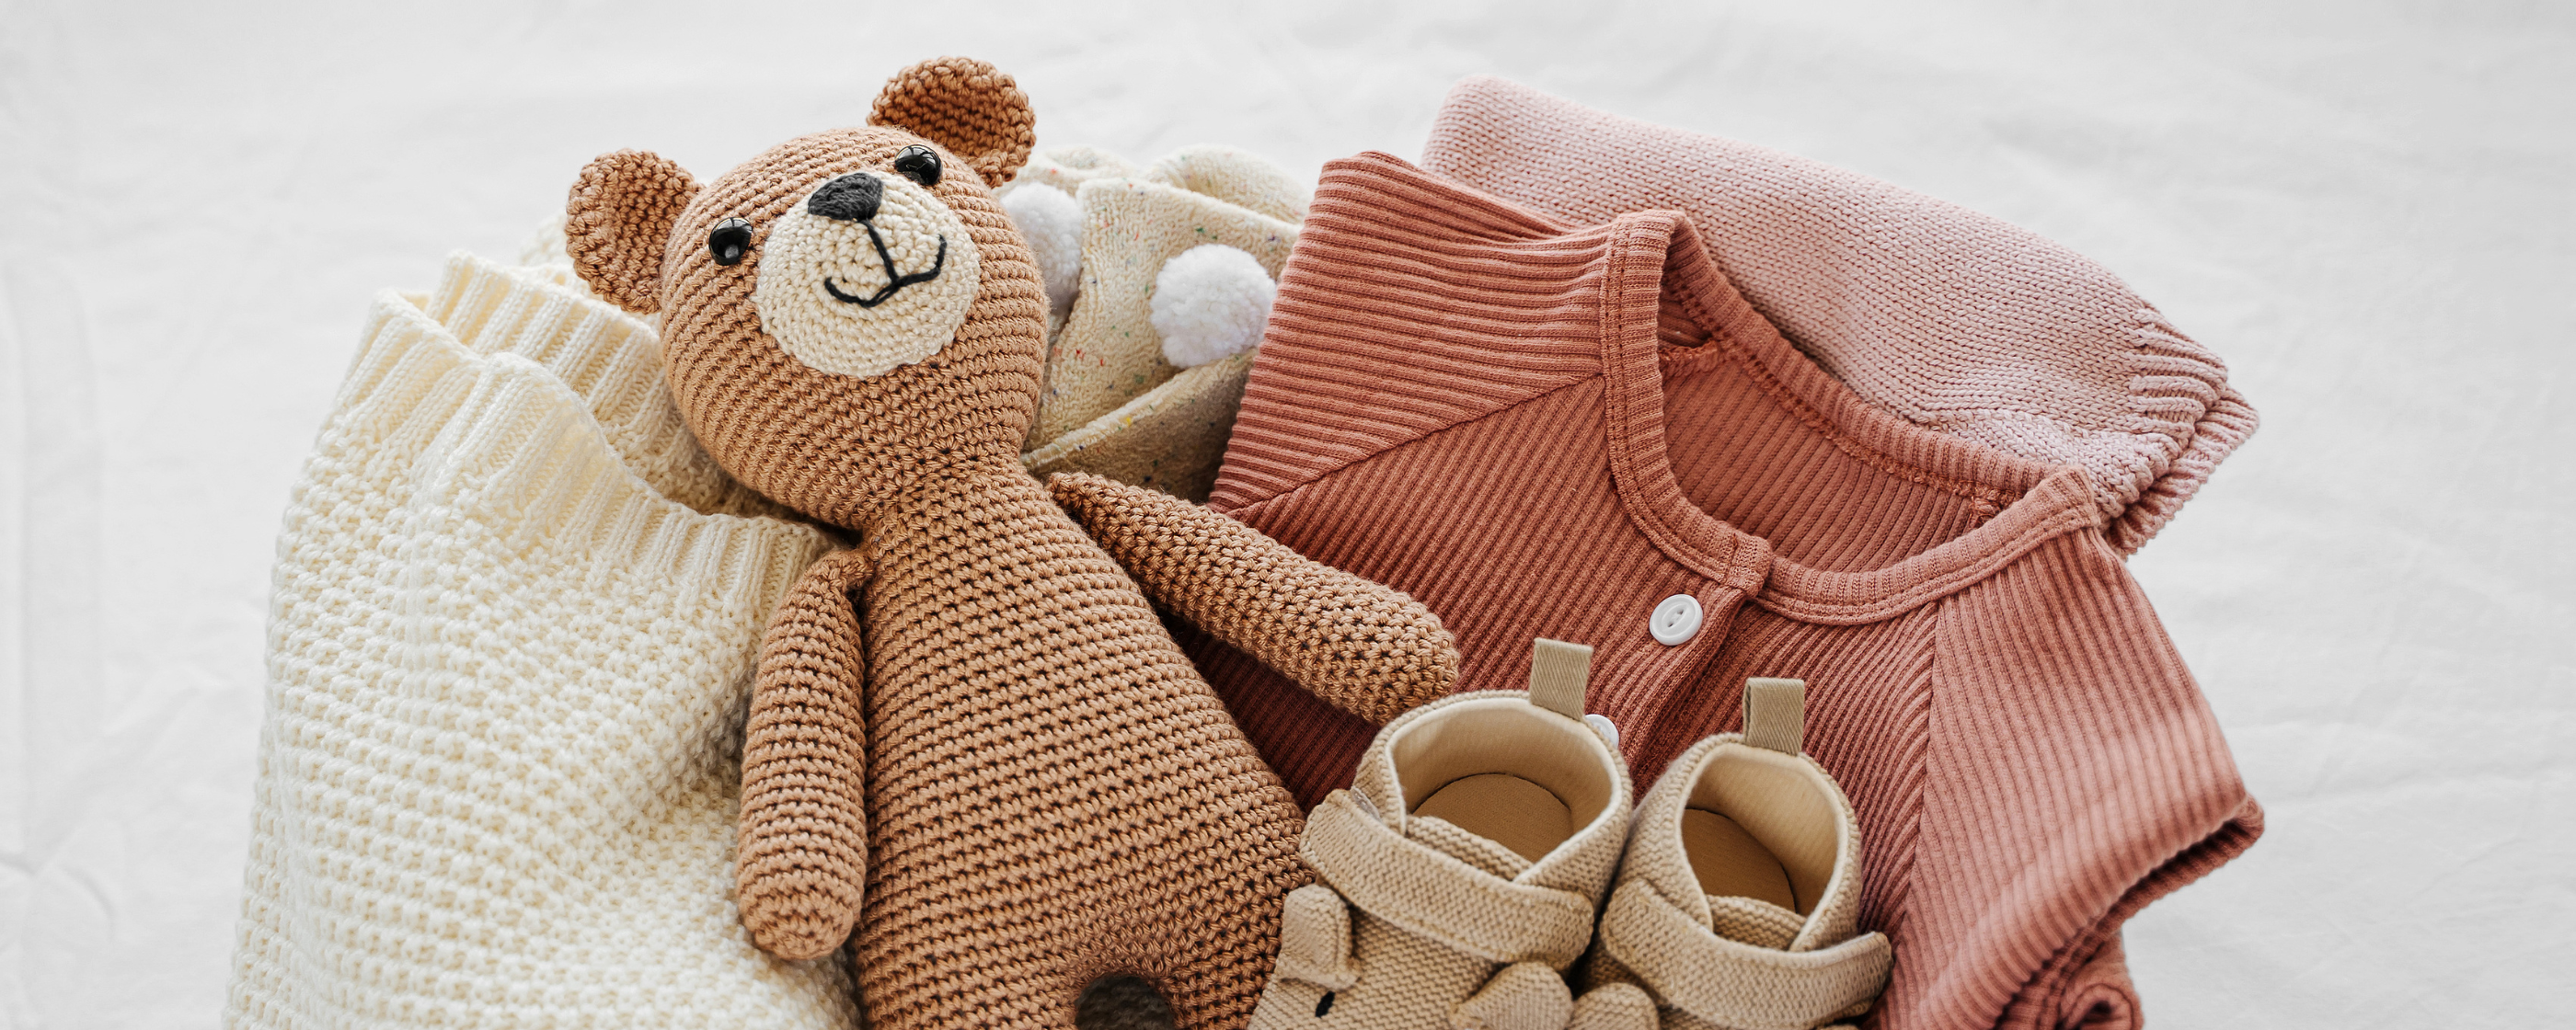 A teddy bear among a collection of sustainable kids and babies apparel.